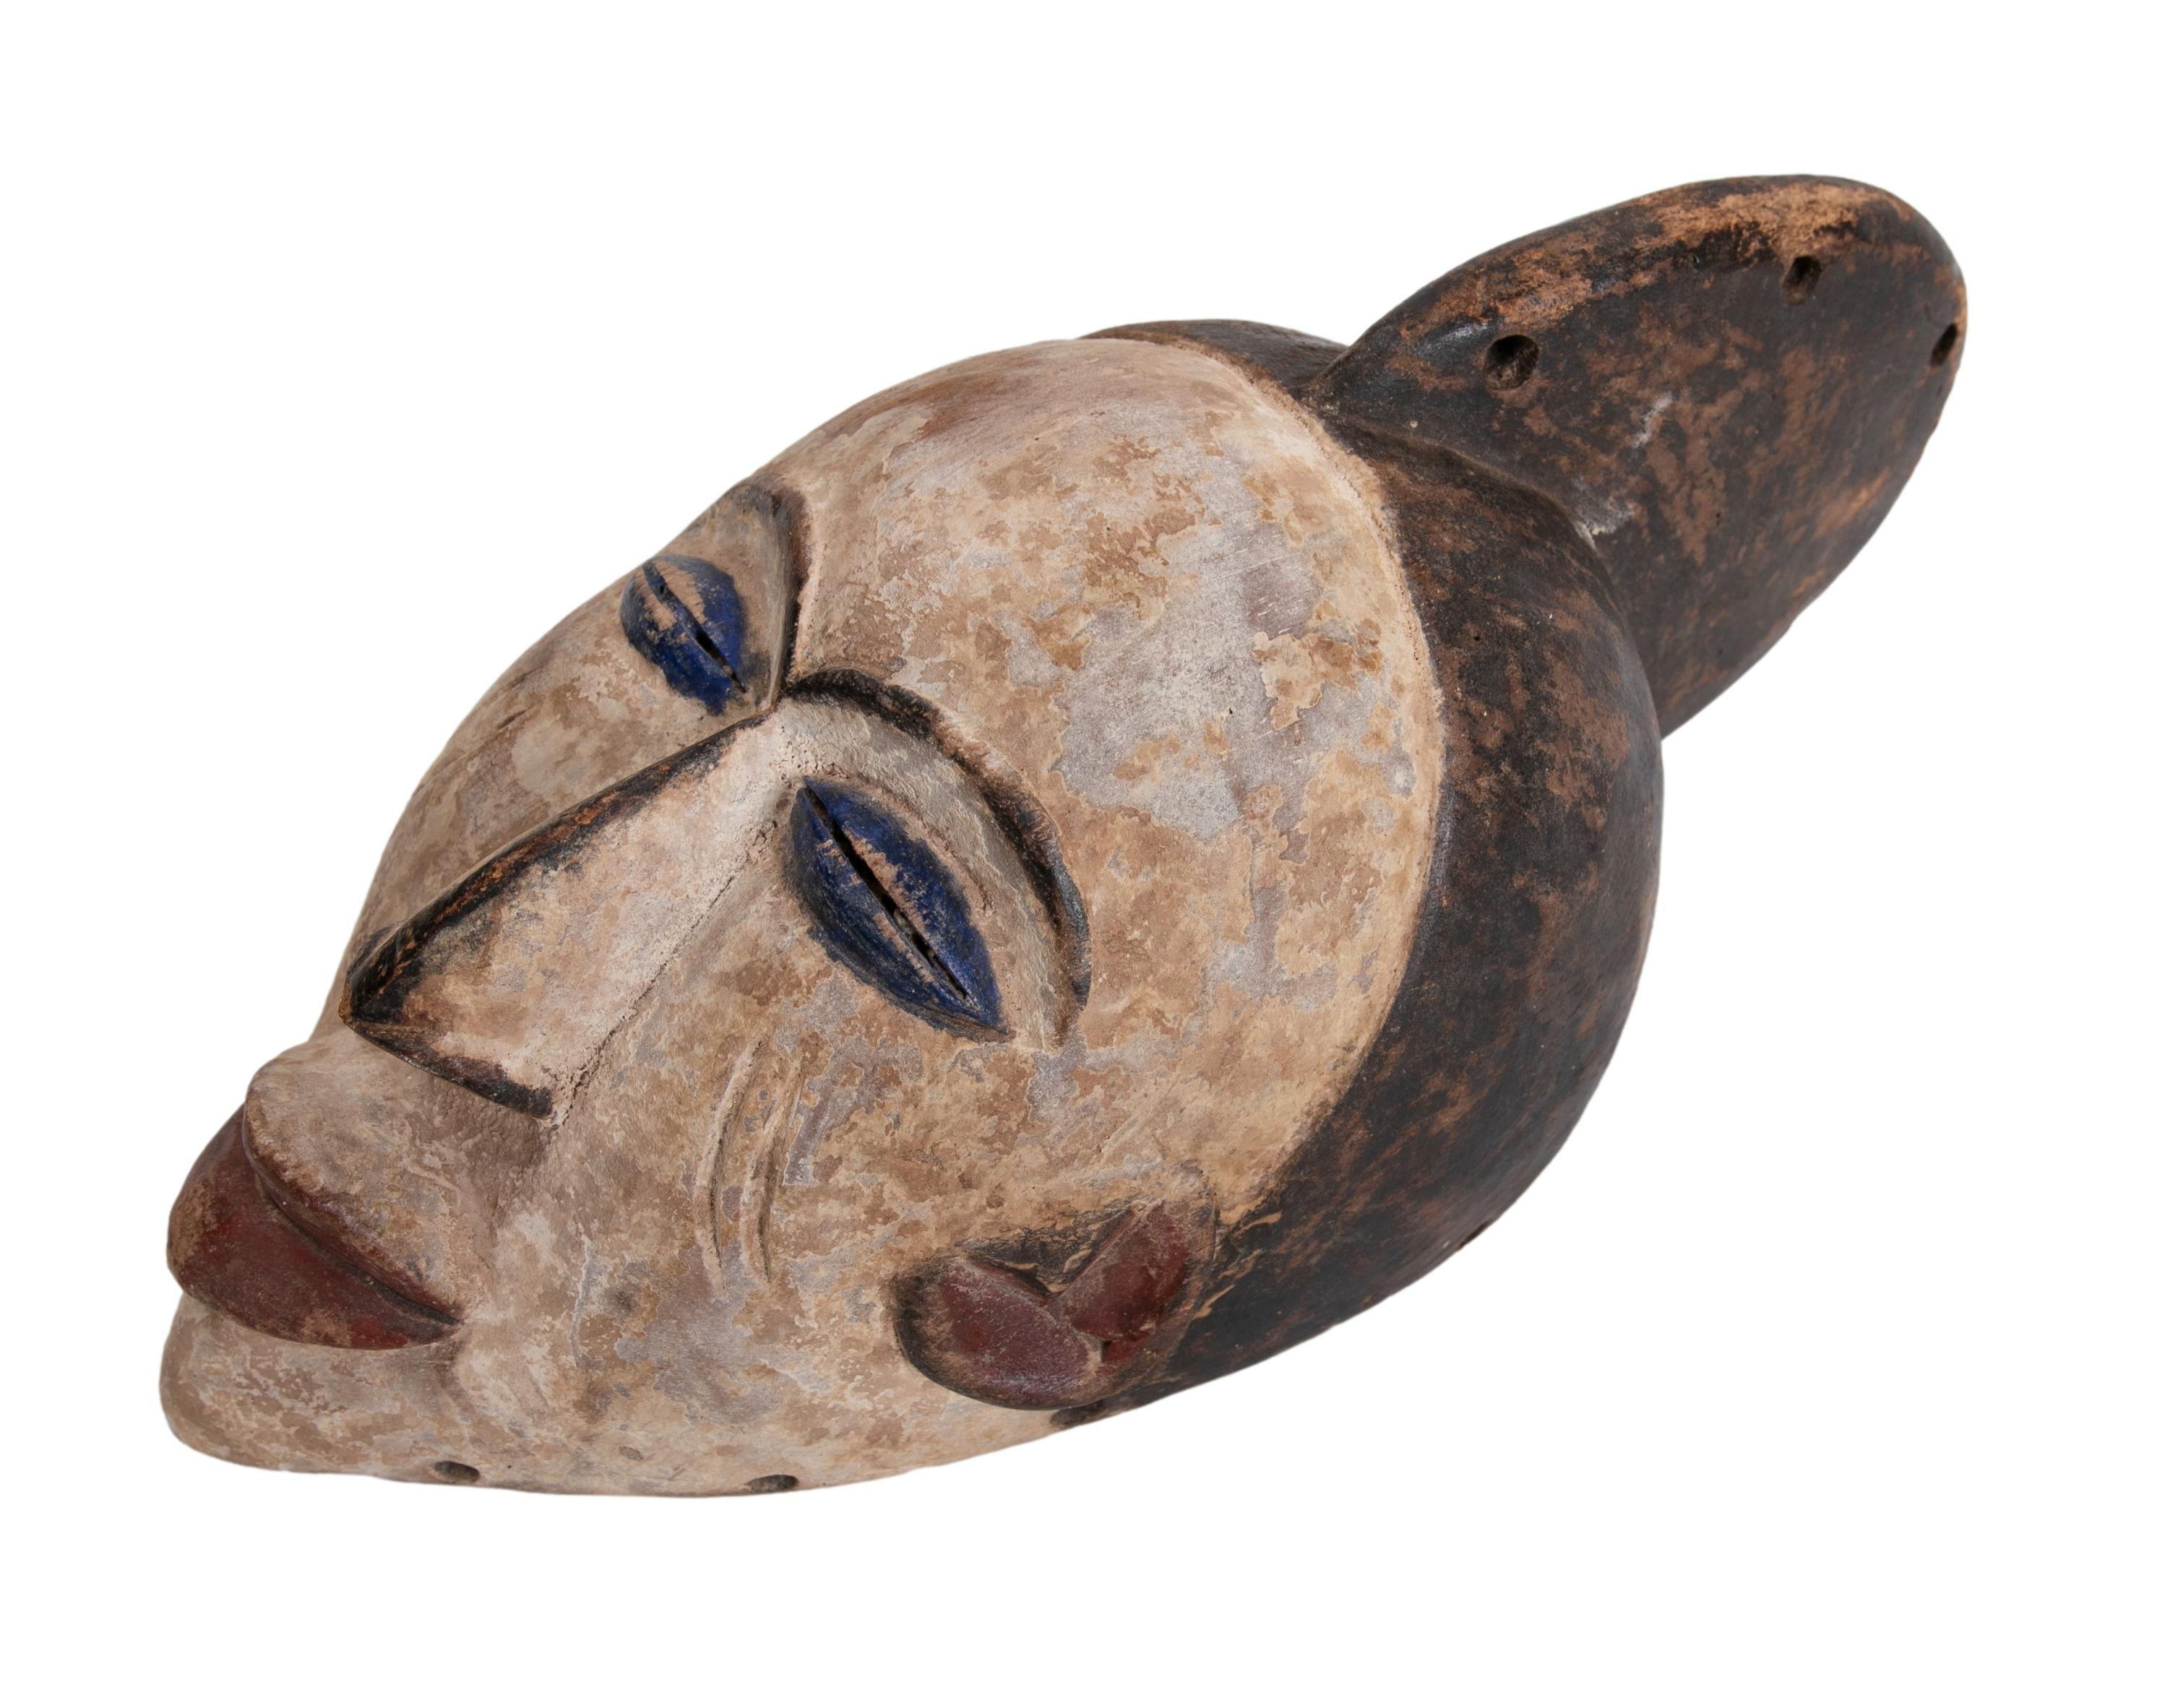 Ethnic 1990s African hand carved wooden 2-tone ceremonial tribal mask.